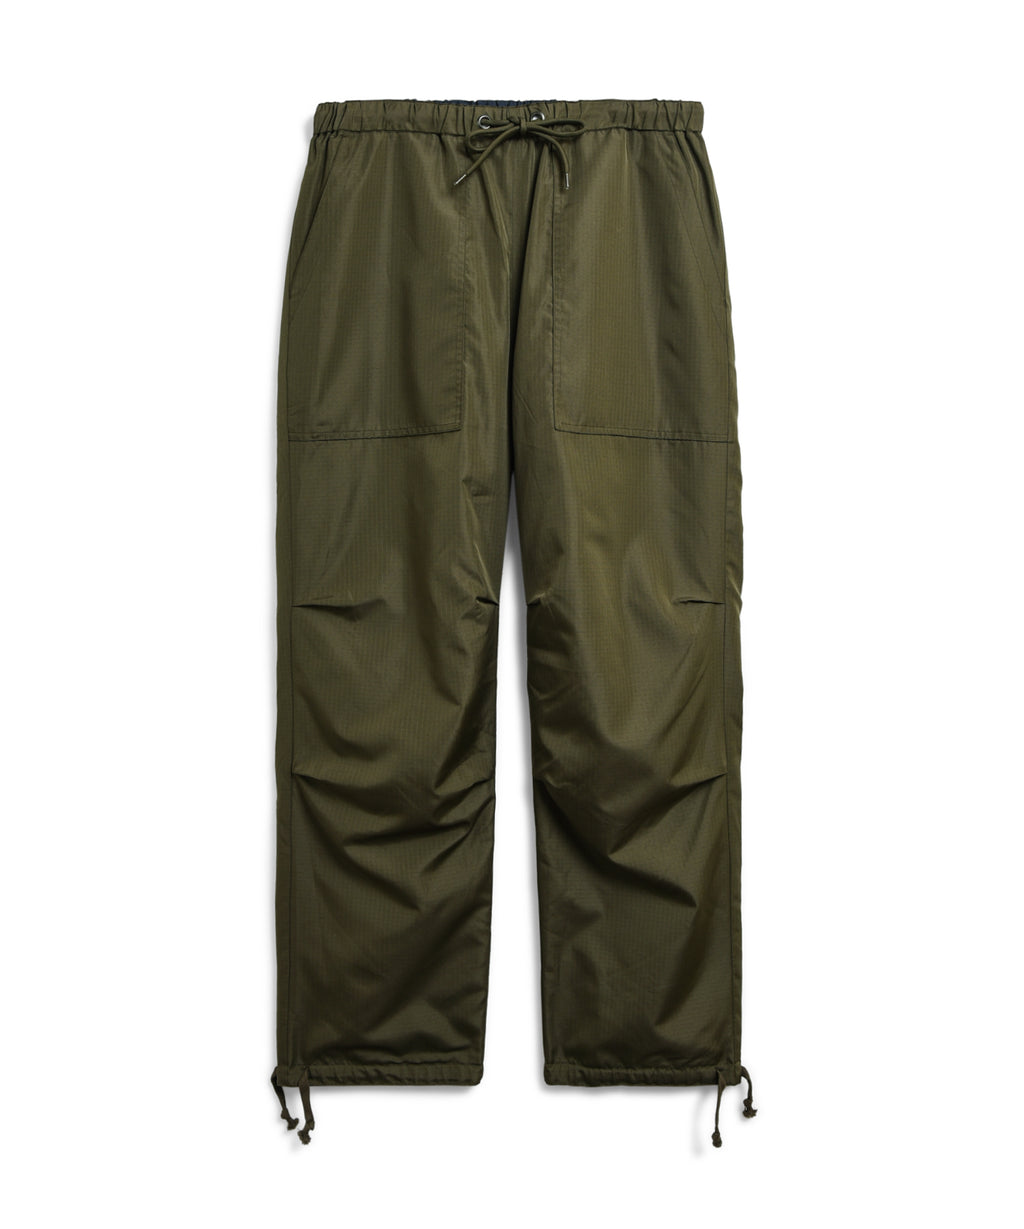 Taion Military Reversible Pants Dark Olive